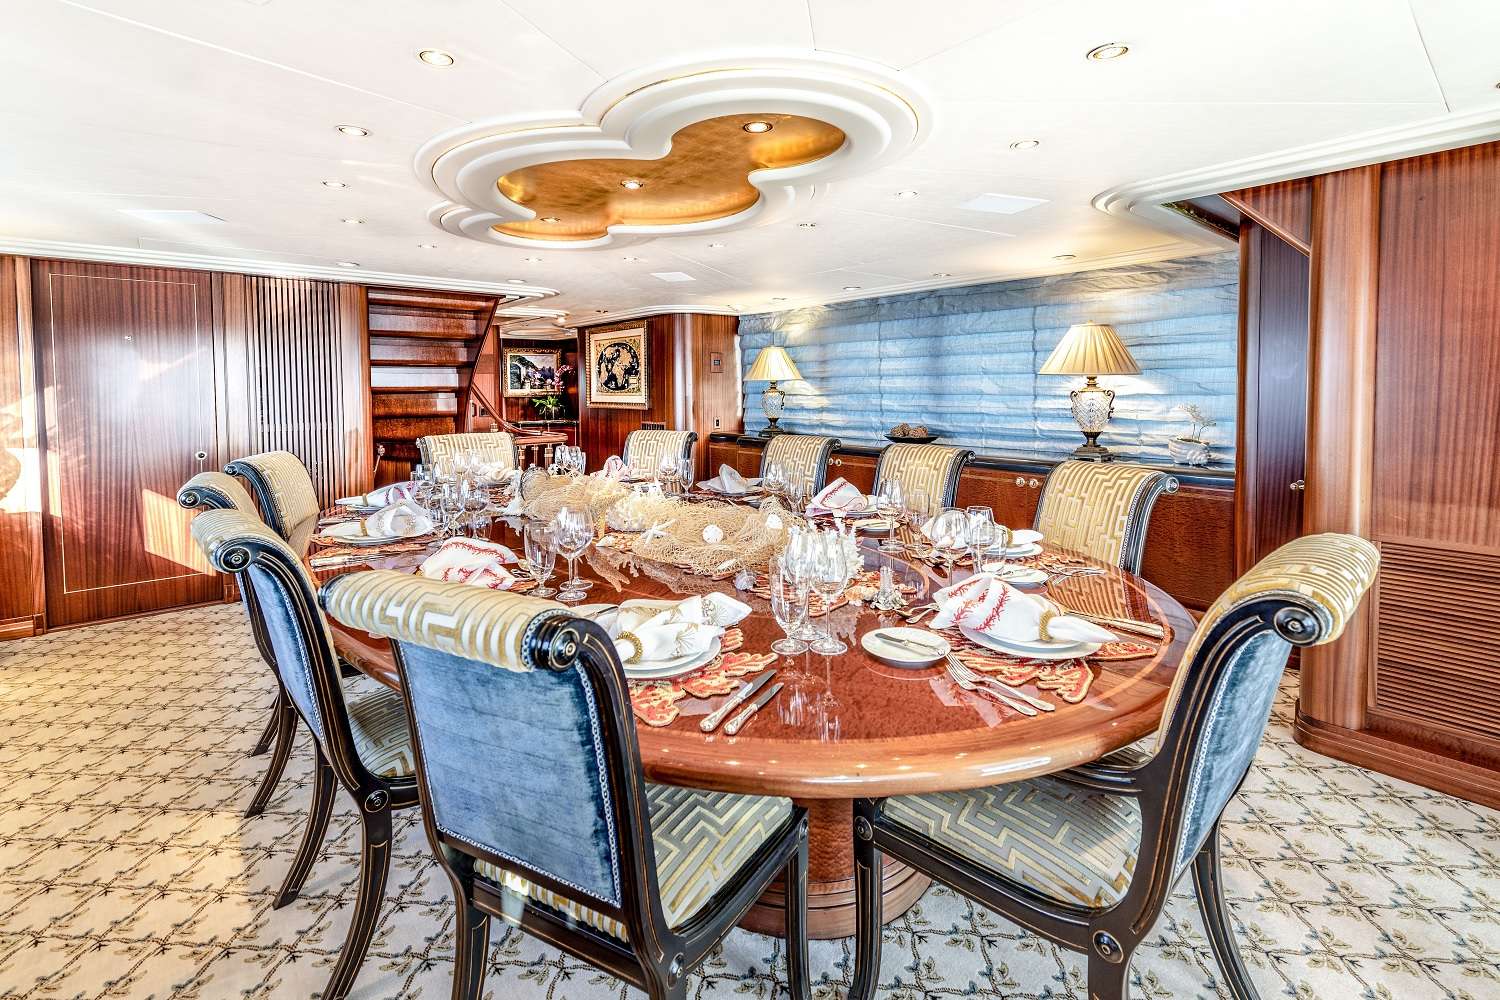 Motor Yacht 'NEVER ENOUGH' Formal dining, 10 PAX, 7 Crew, 140.00 Ft, 42.00 Meters, Built 1992, Feadship, Refit Year 2019